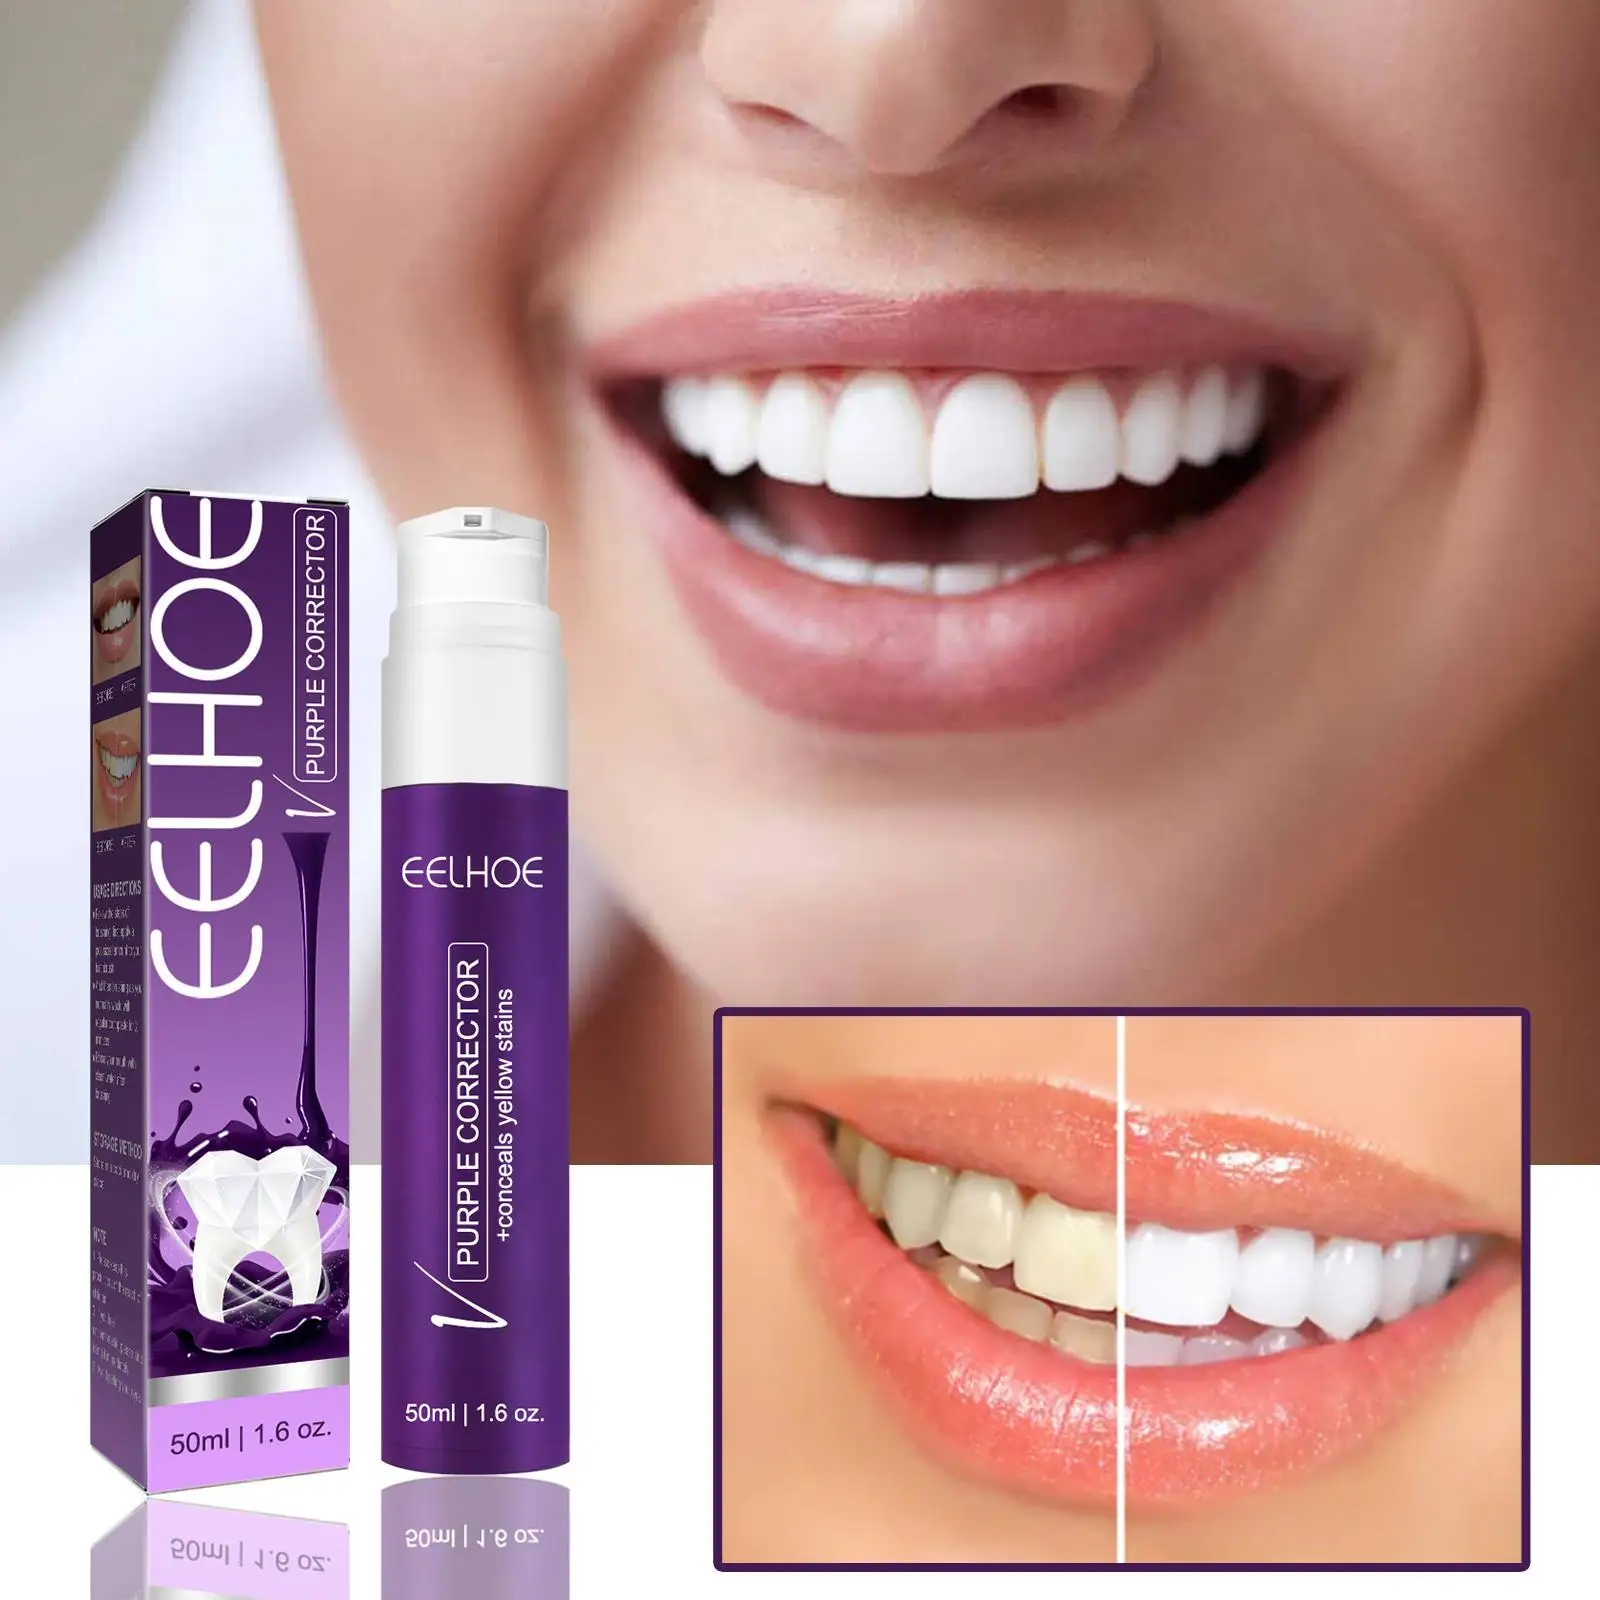 

50ml Repair Bright White Anti-Sensitive Toothpaste Gel Gentle Whitening Toothpaste Remove Stains Plaque Fresh Breath Teeth Care